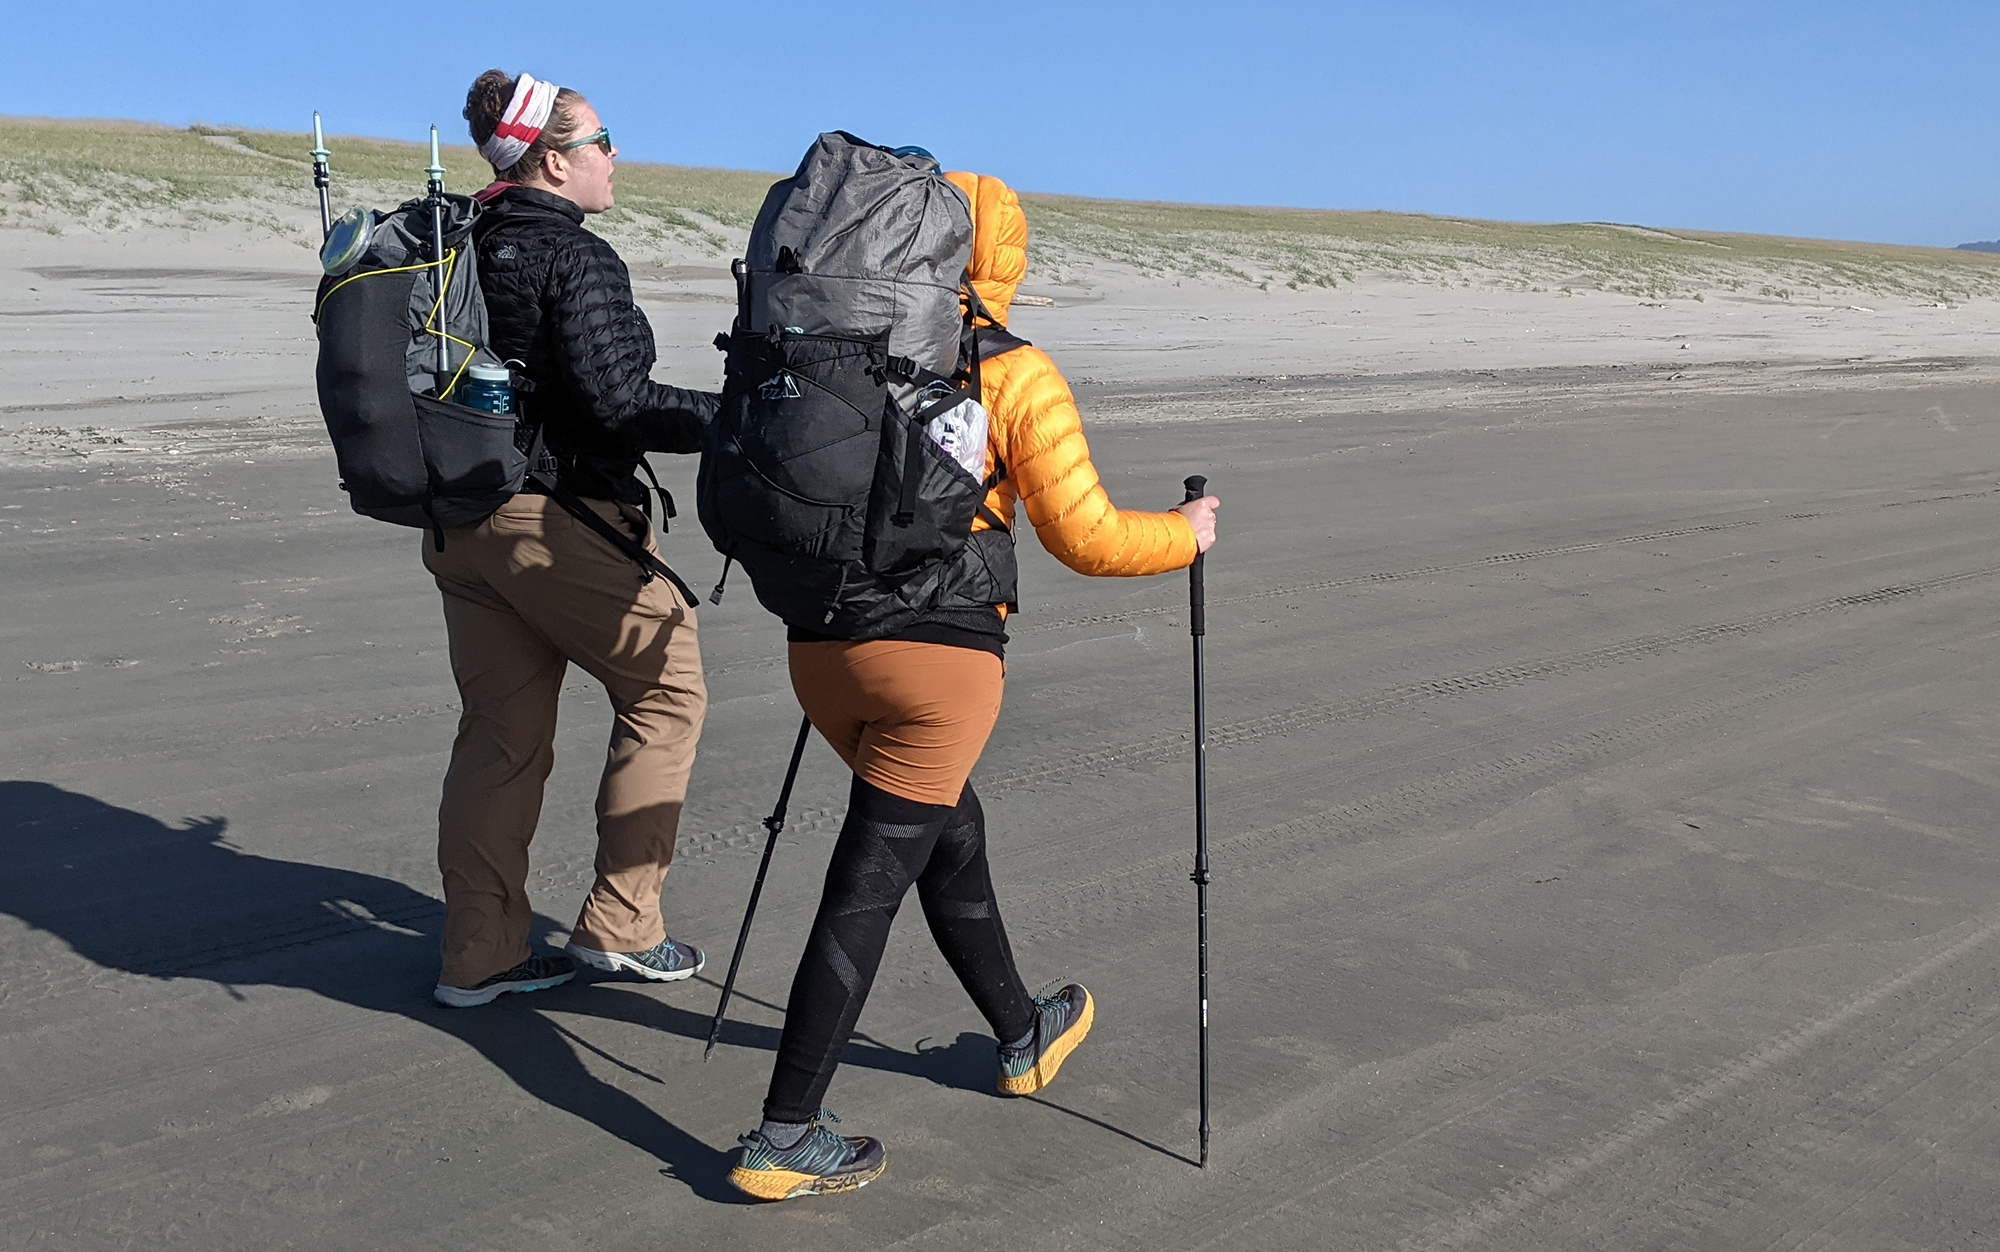 Trekking poles’ forward momentum can help you get into a hiking groove.